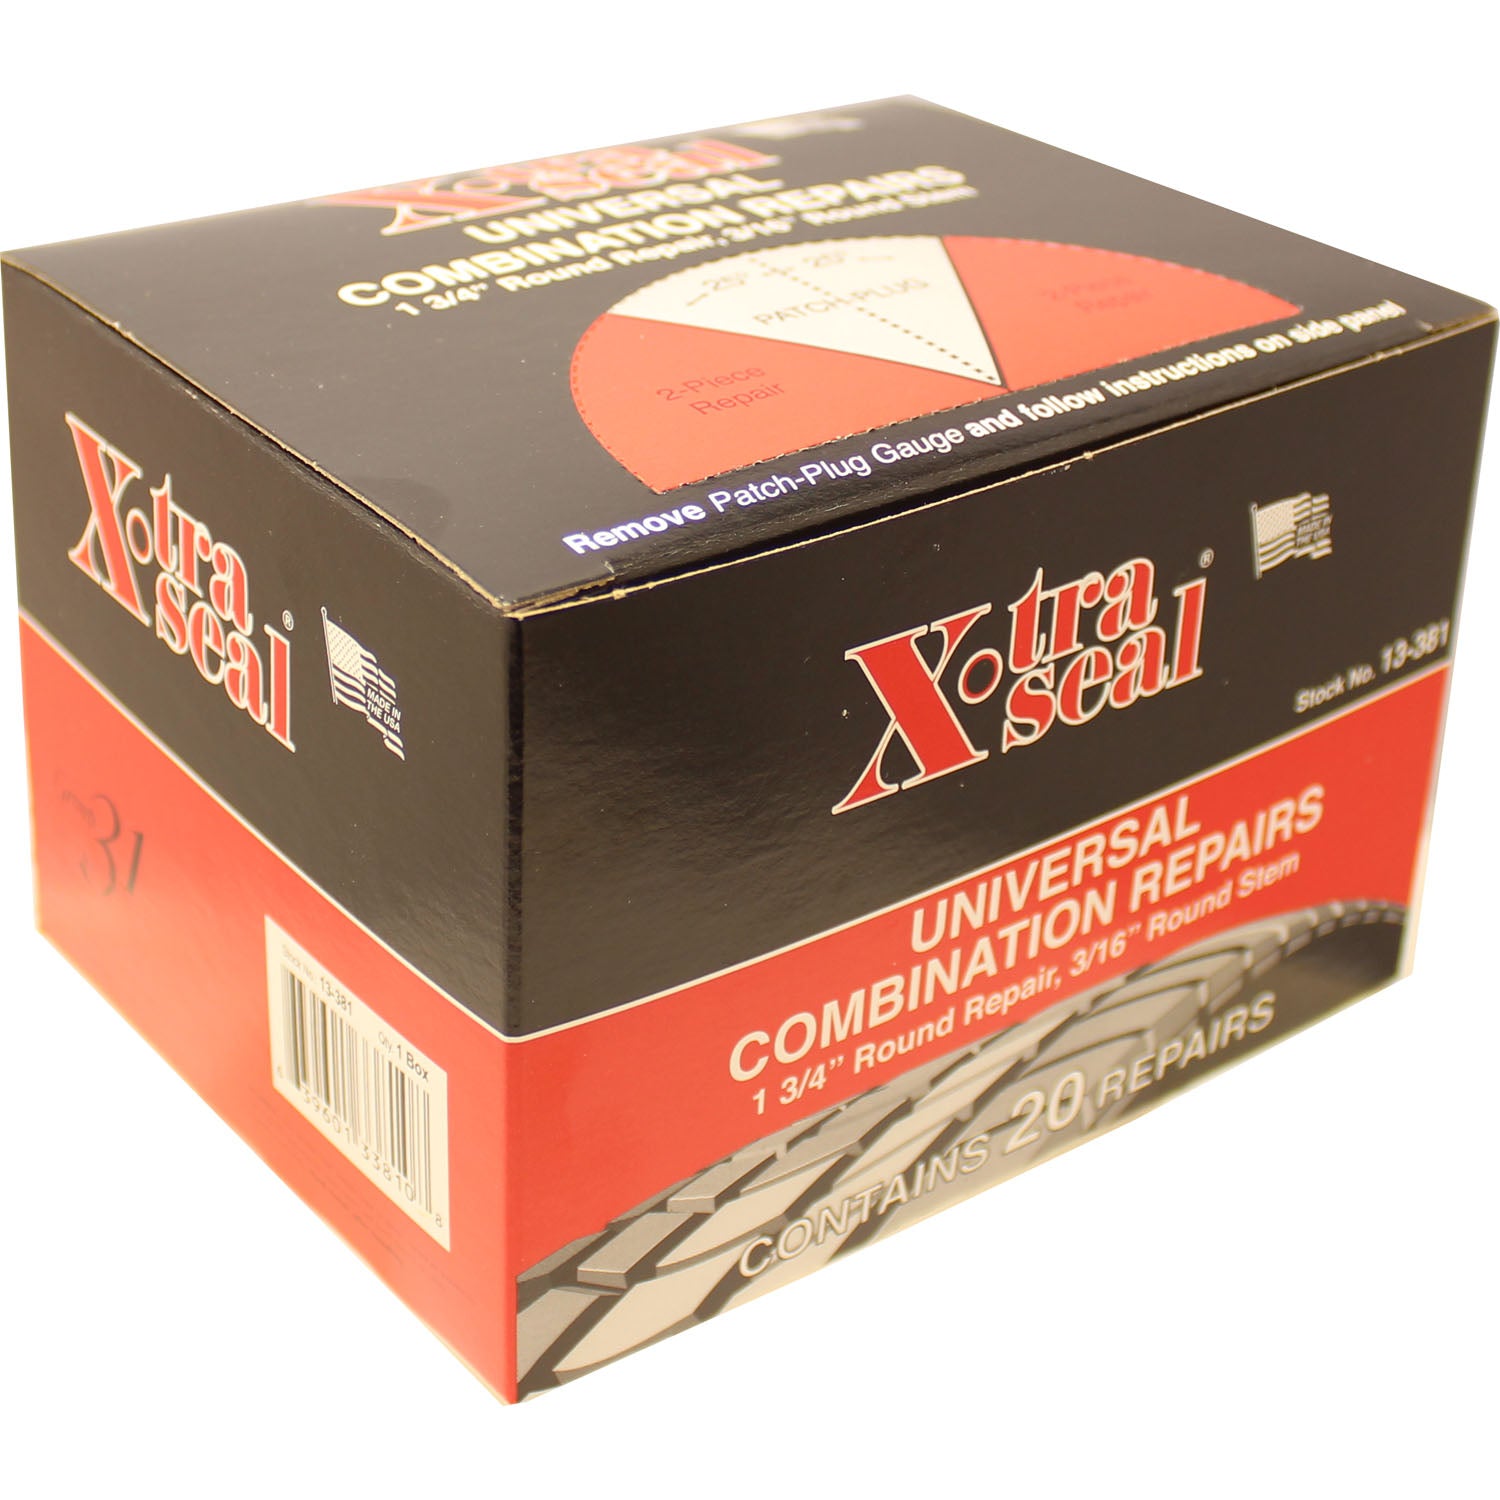 Xtra Seal 13-381 3/16" Universal Tire Patch Plug 1-3/4" Round Patch Box of 20